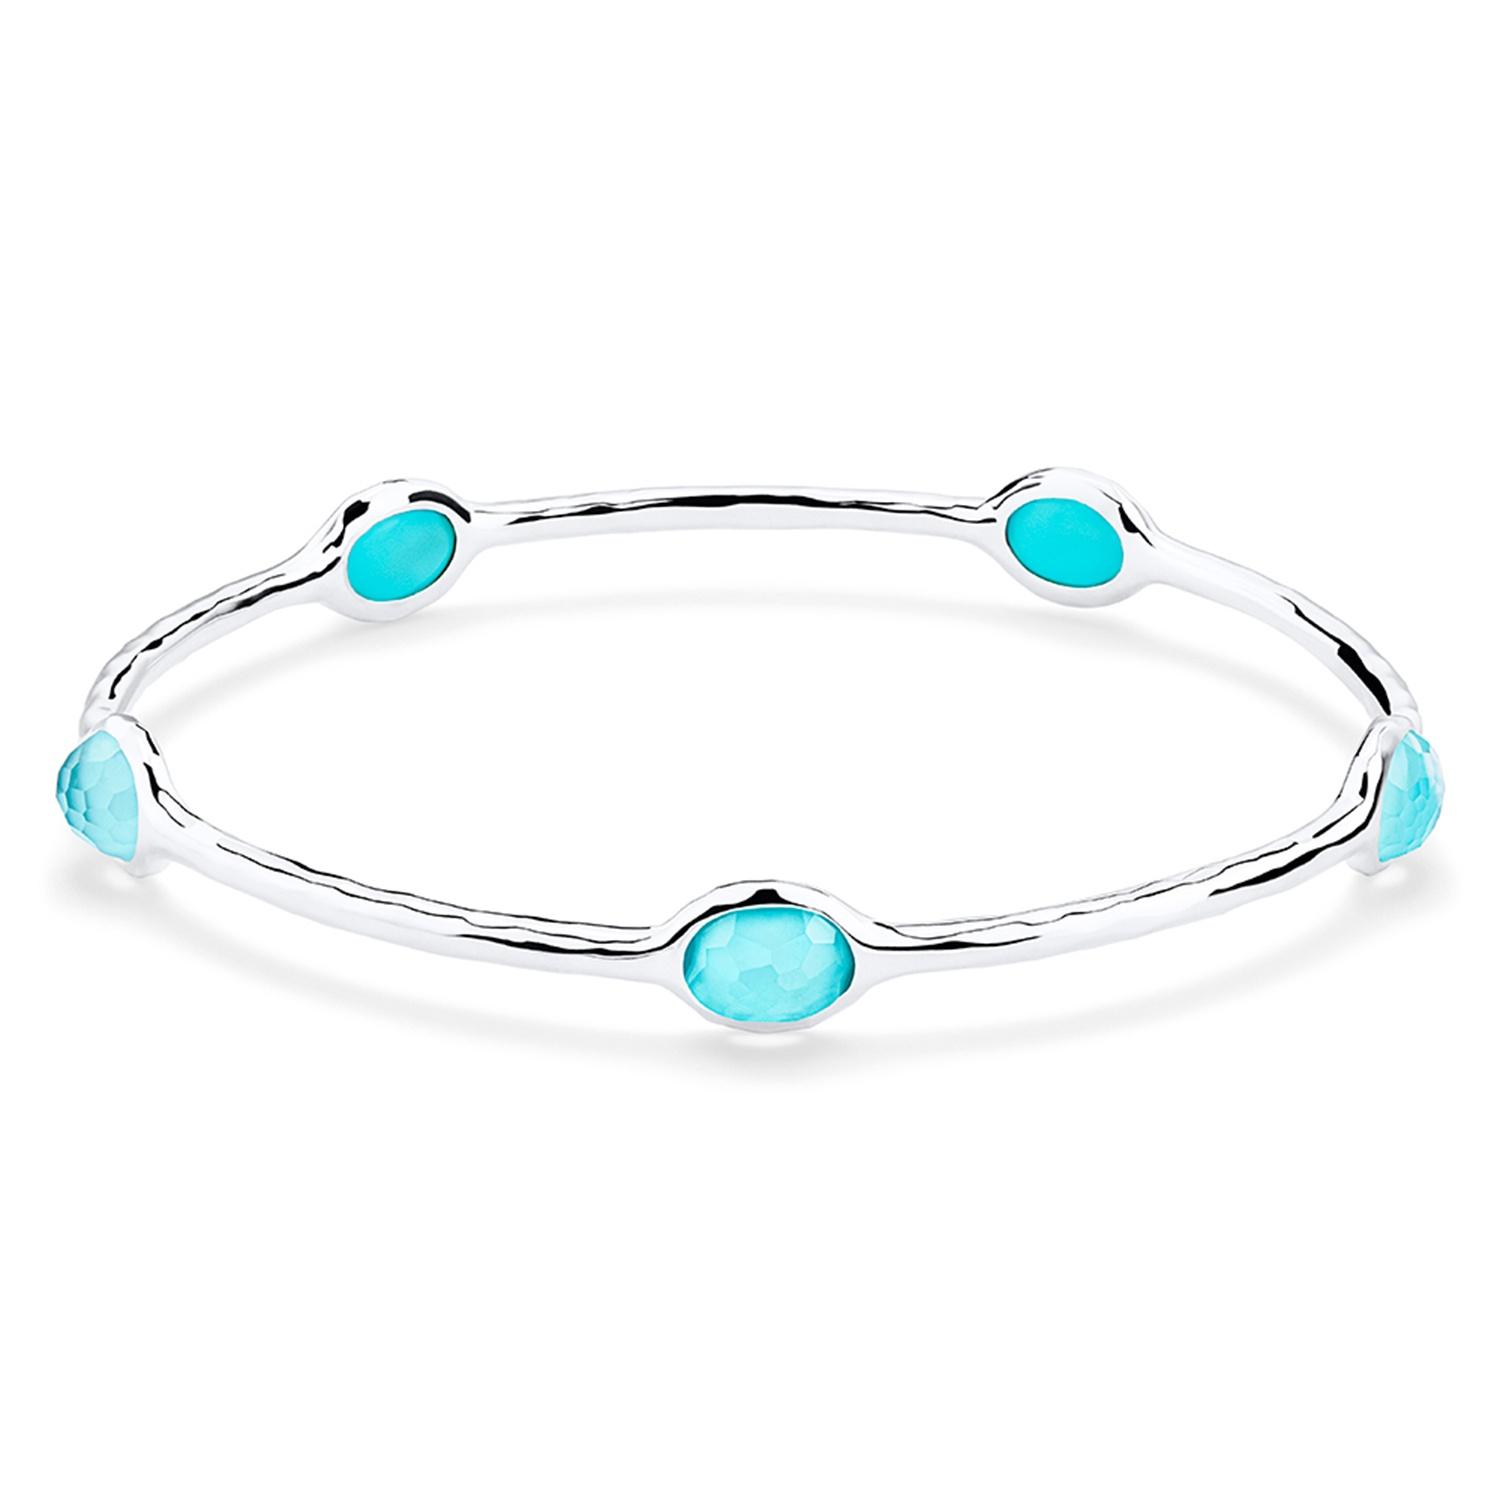 Ippolita Sterling Silver Rock Candy Turquoise & Clear Quartz Bangle